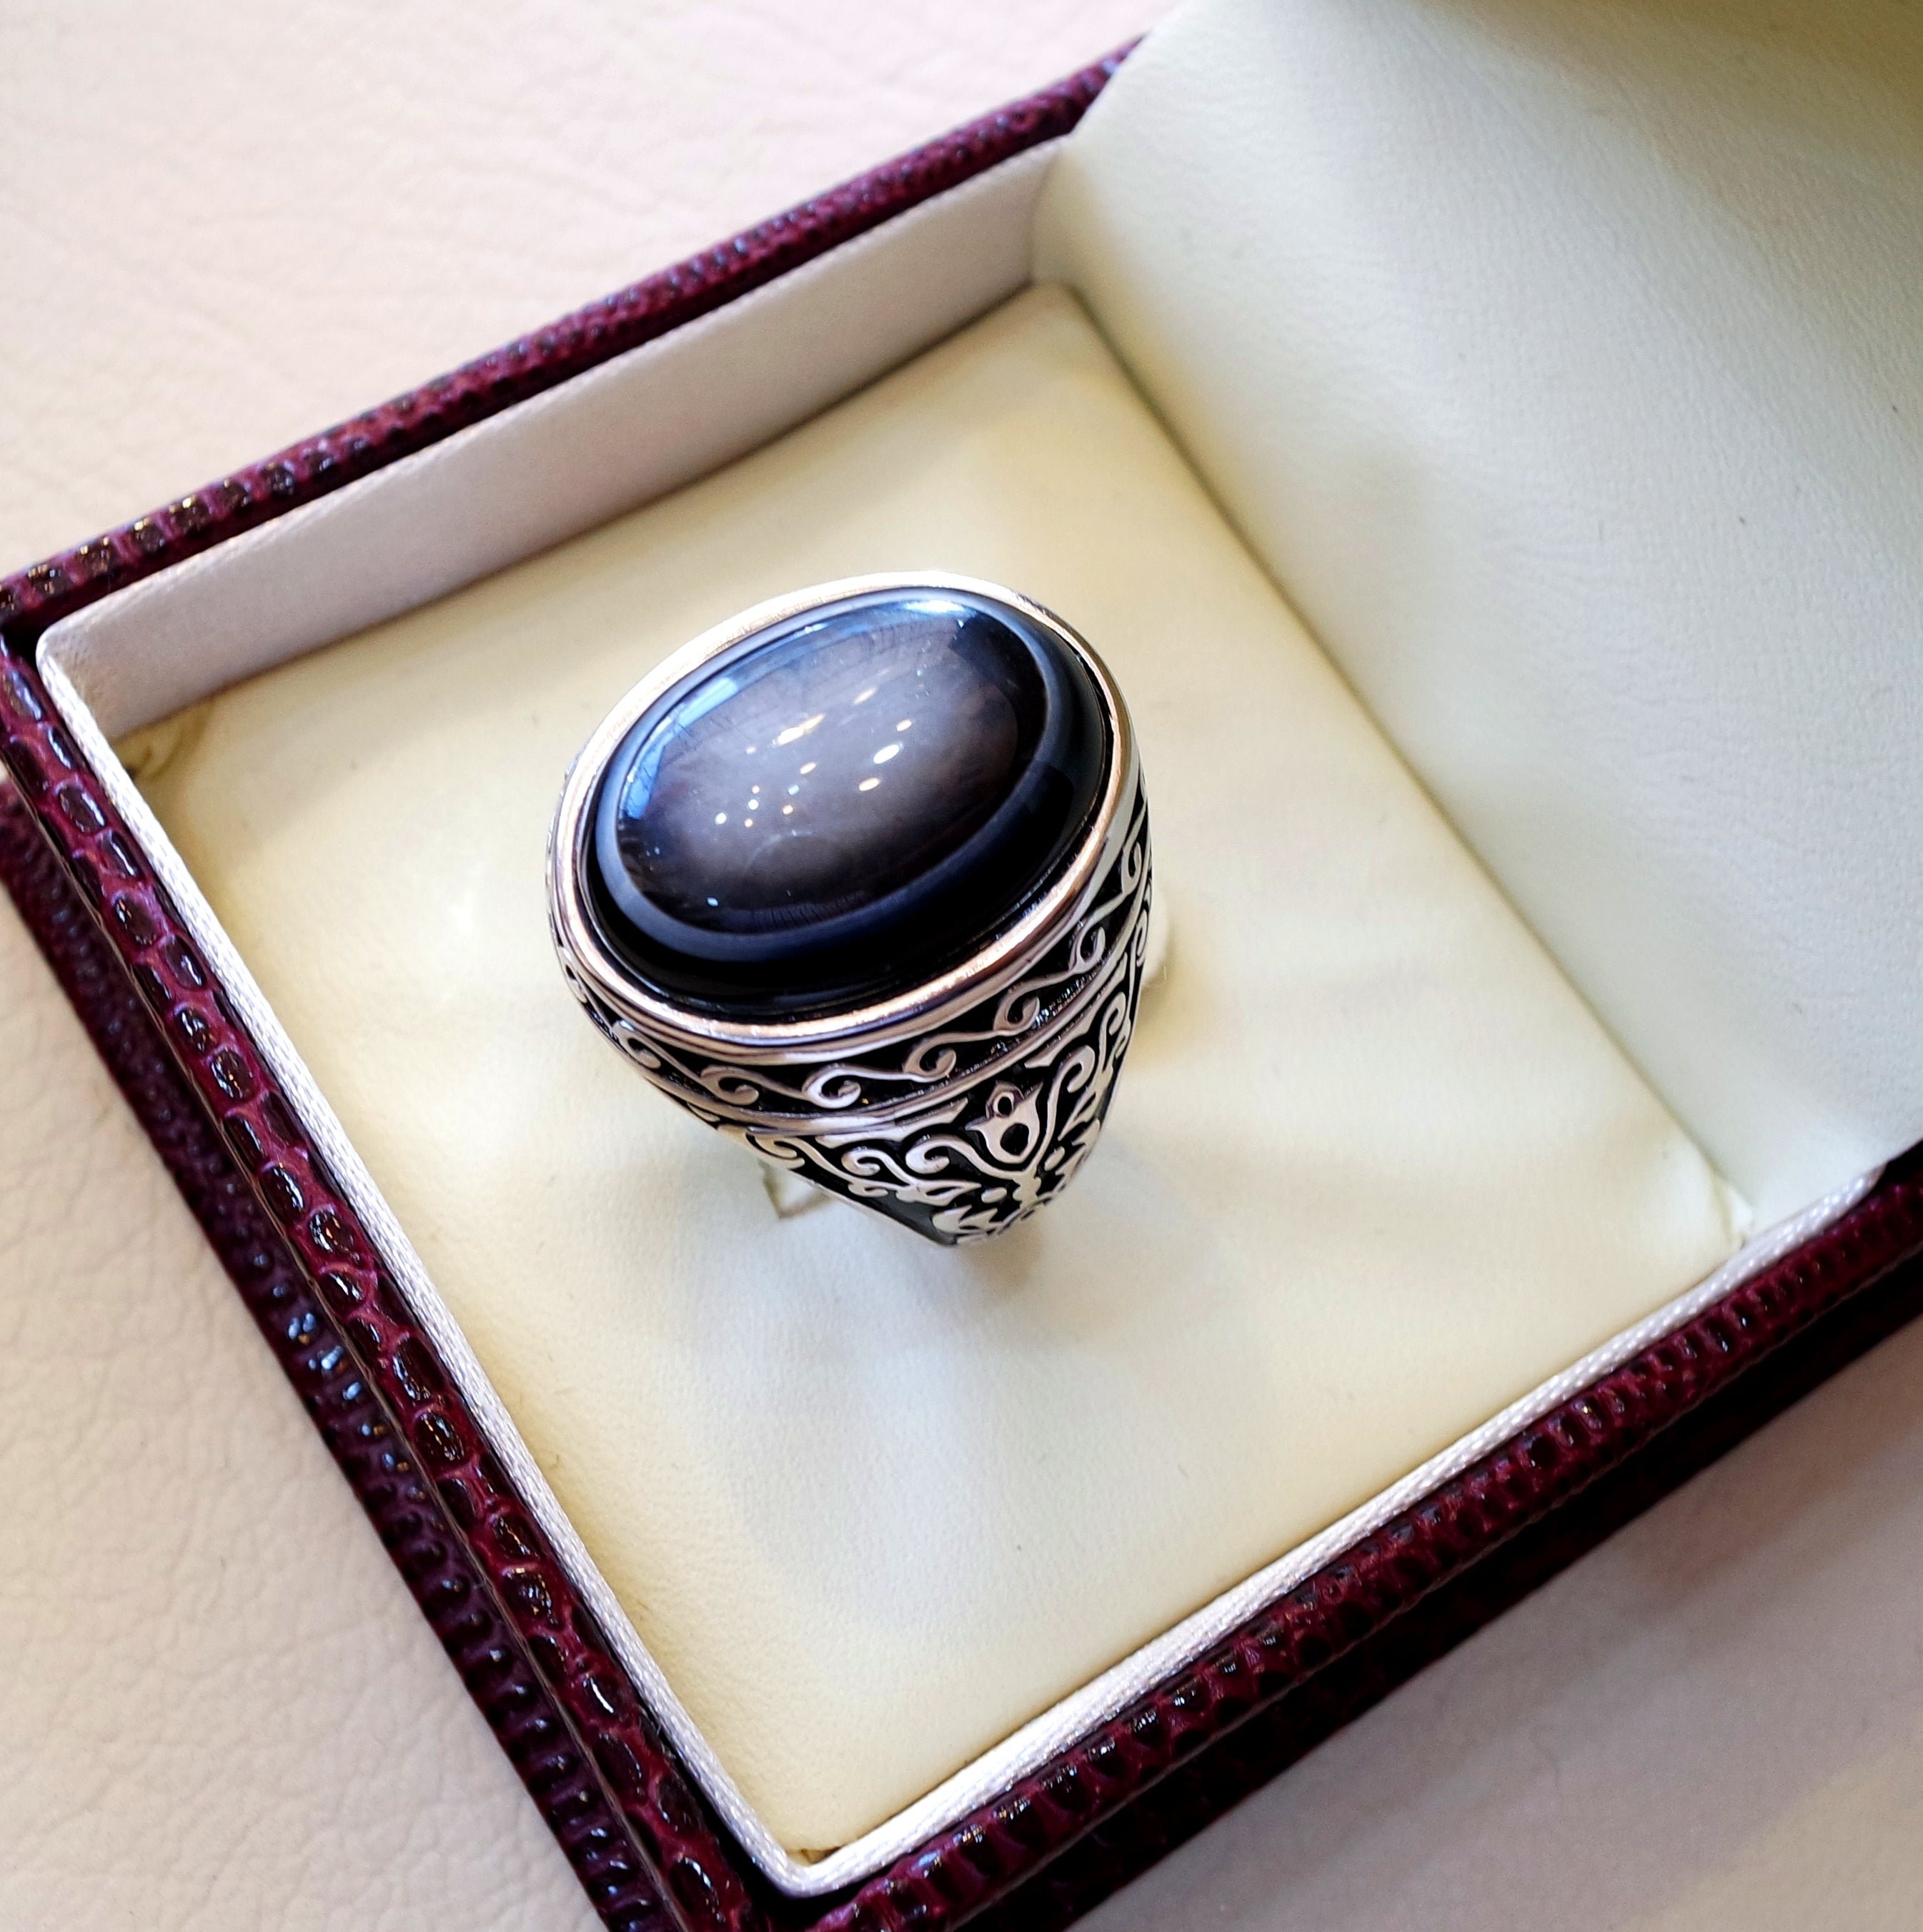 Sulymani aqeeq gorgeous agate natural cabochon man ring sterling silver all sizes jewelry middle eastern arabic turkey antique style